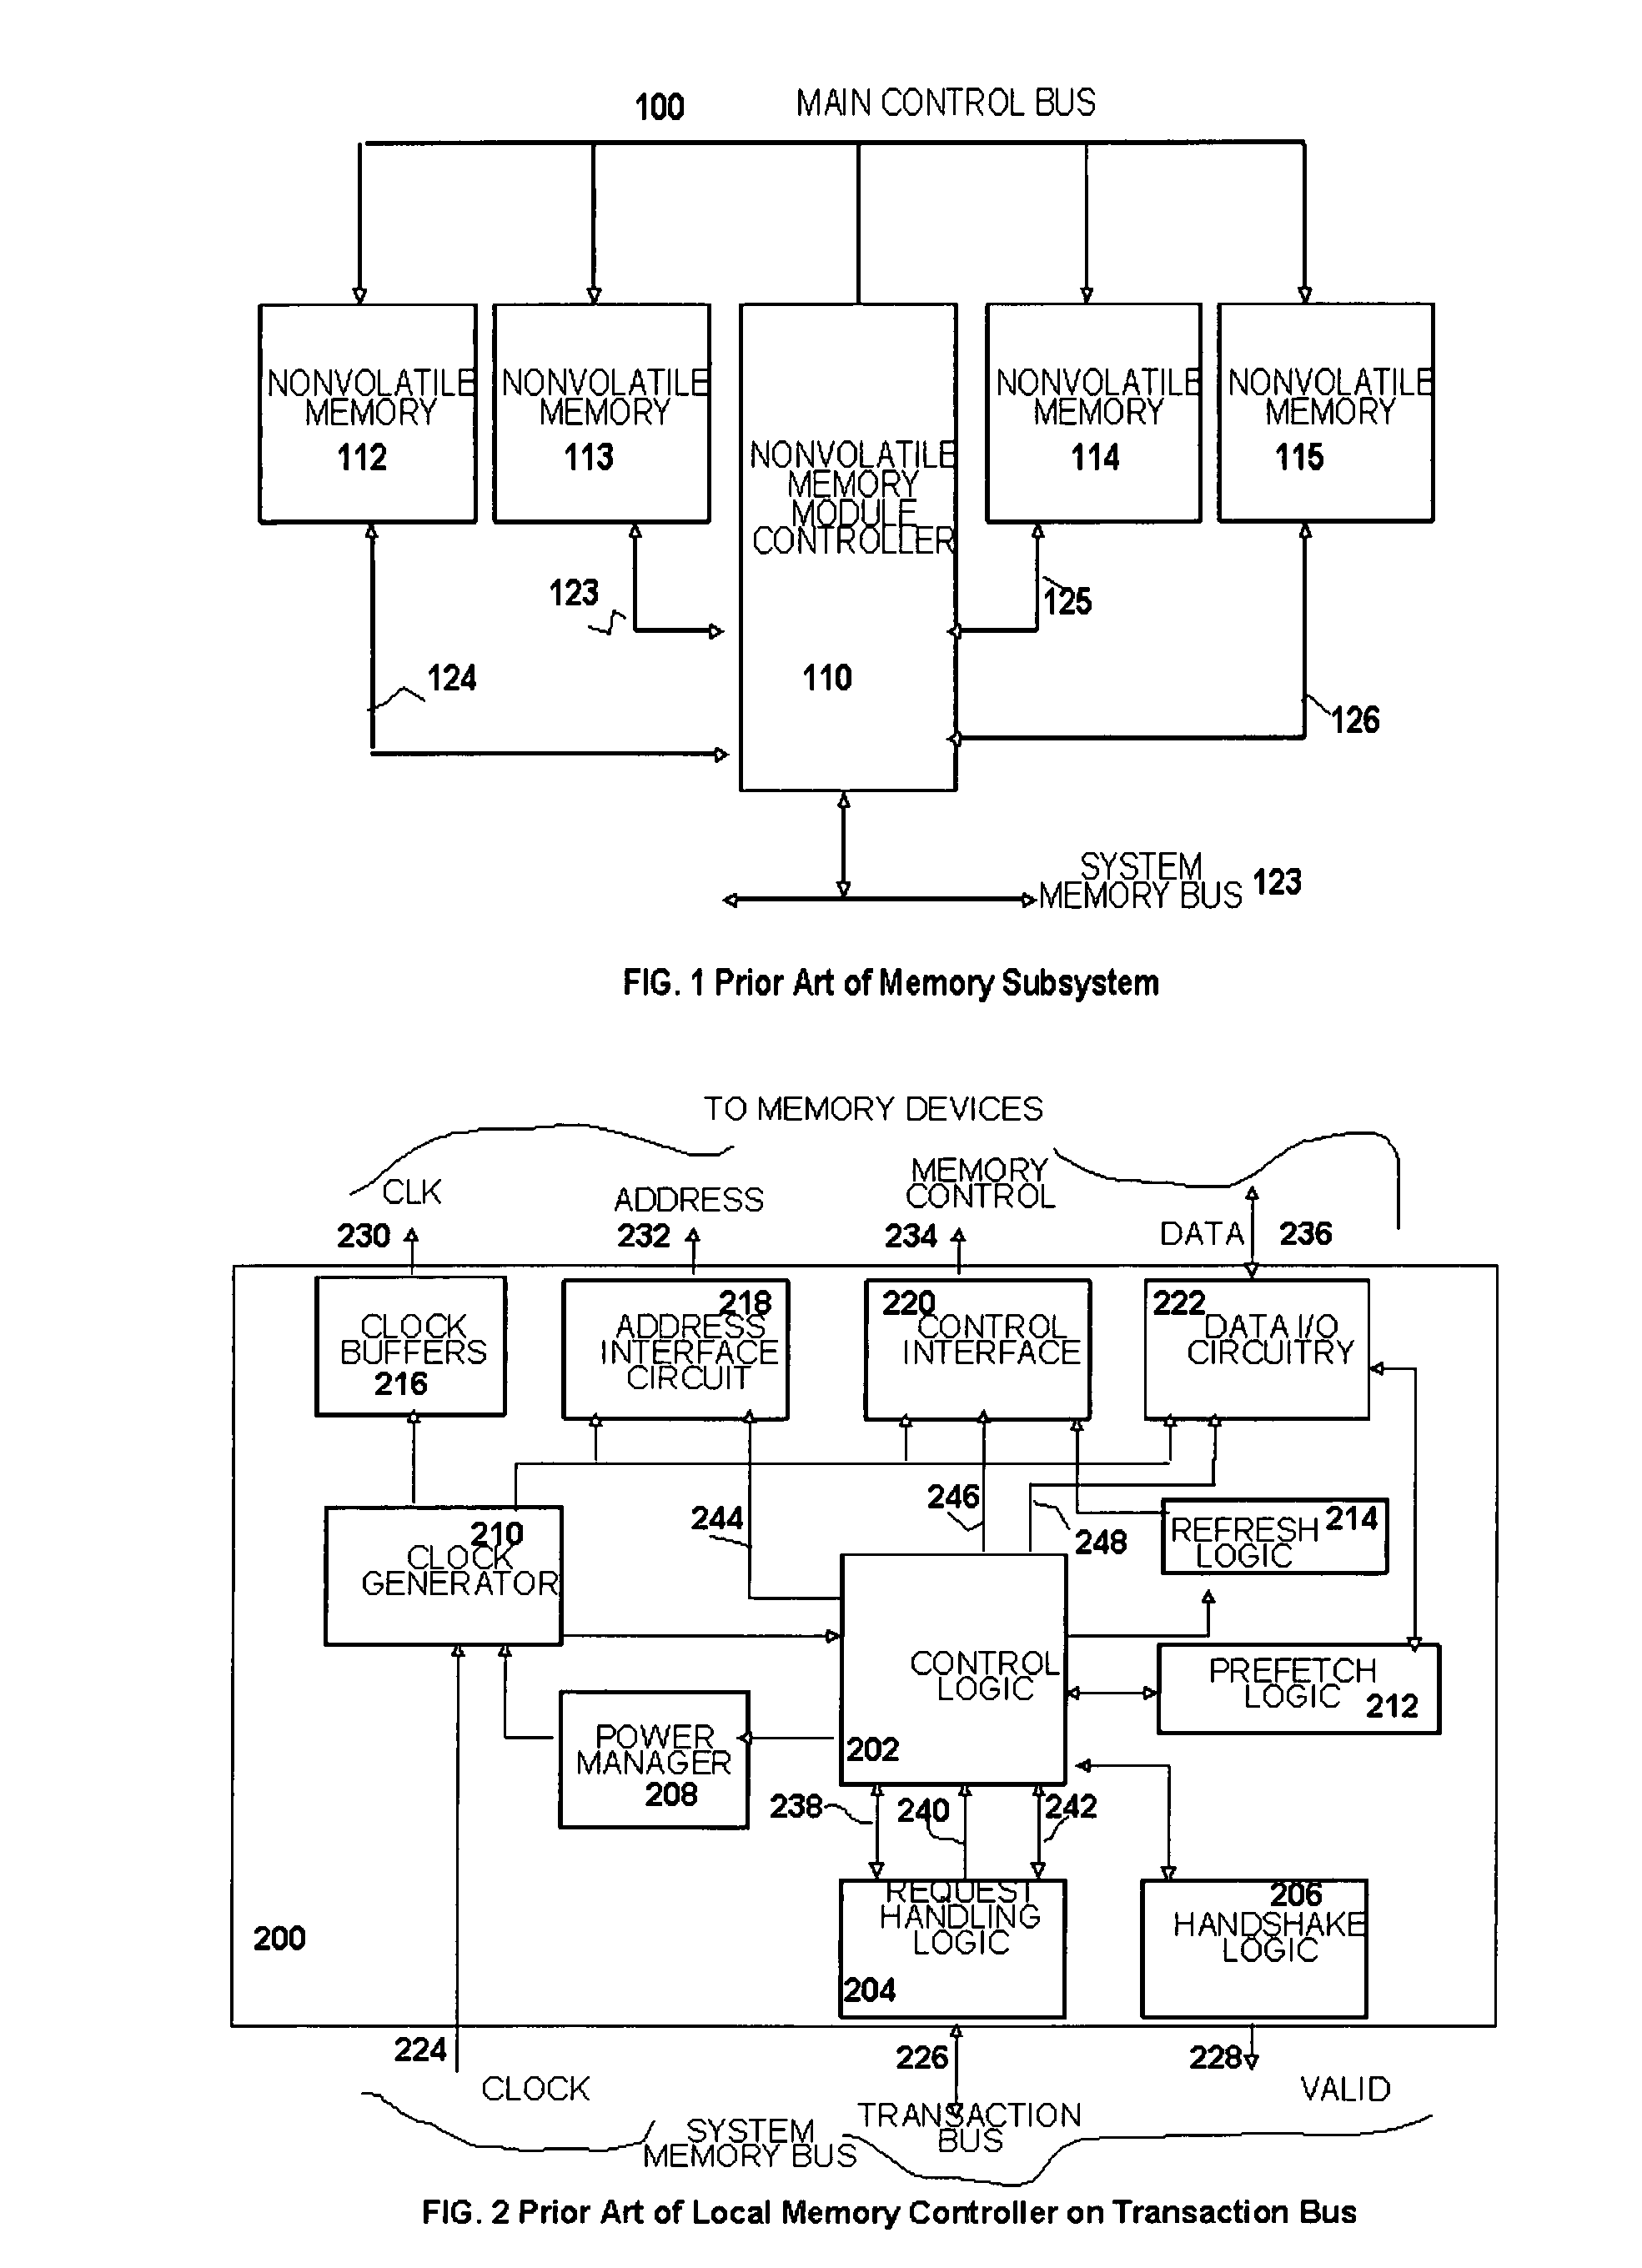 High bandwidth distributed computing solid state memory storage system